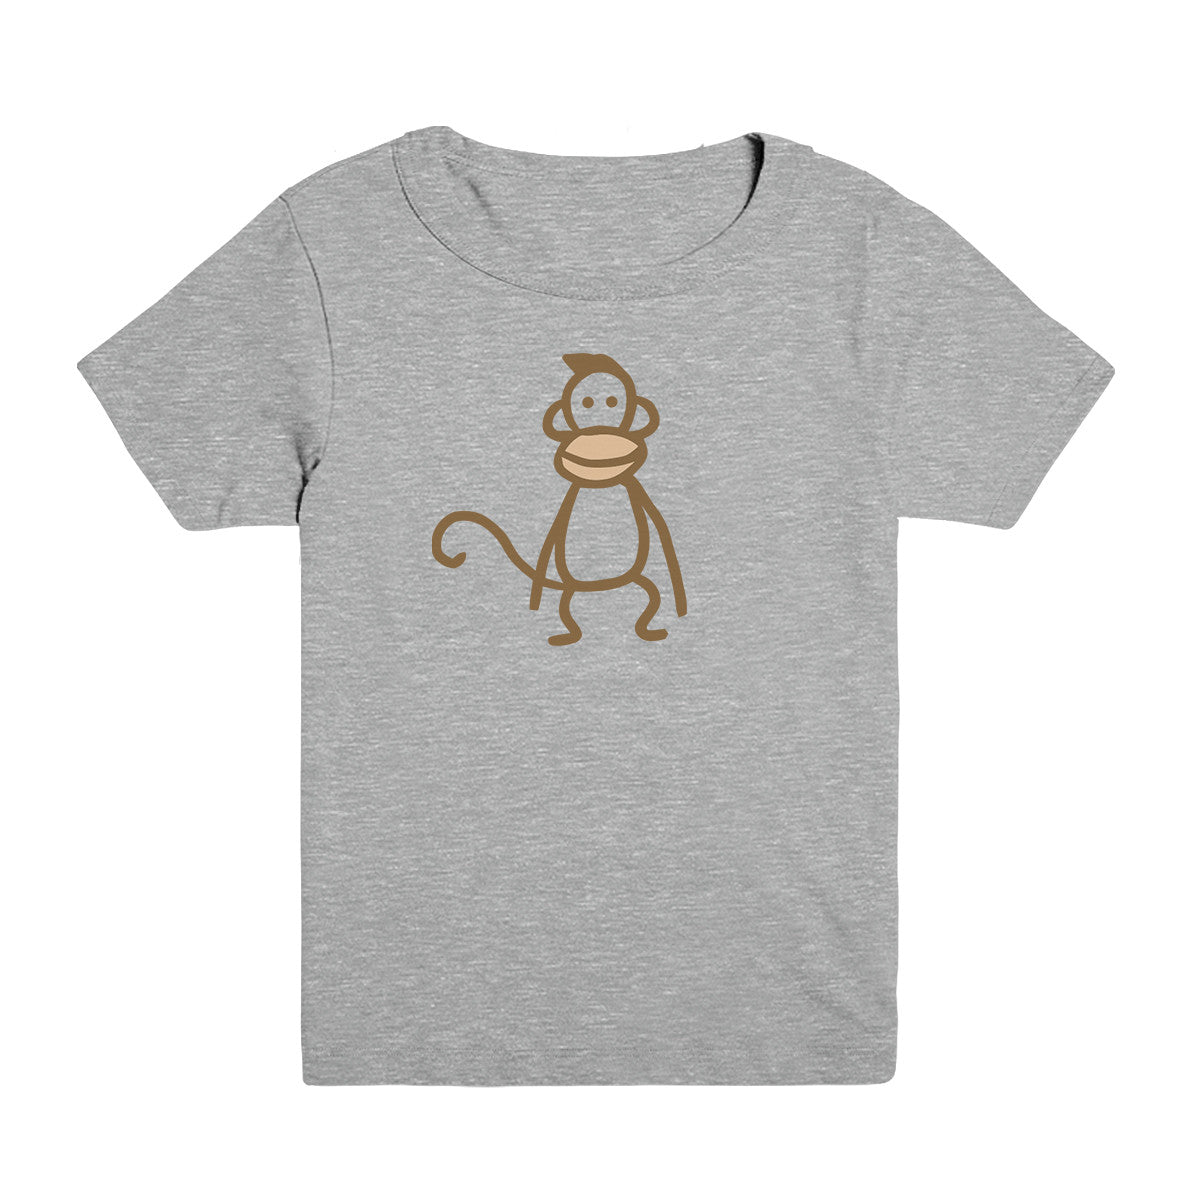 Instant Gratification Monkey Kid's Tee - Wait But Why Store